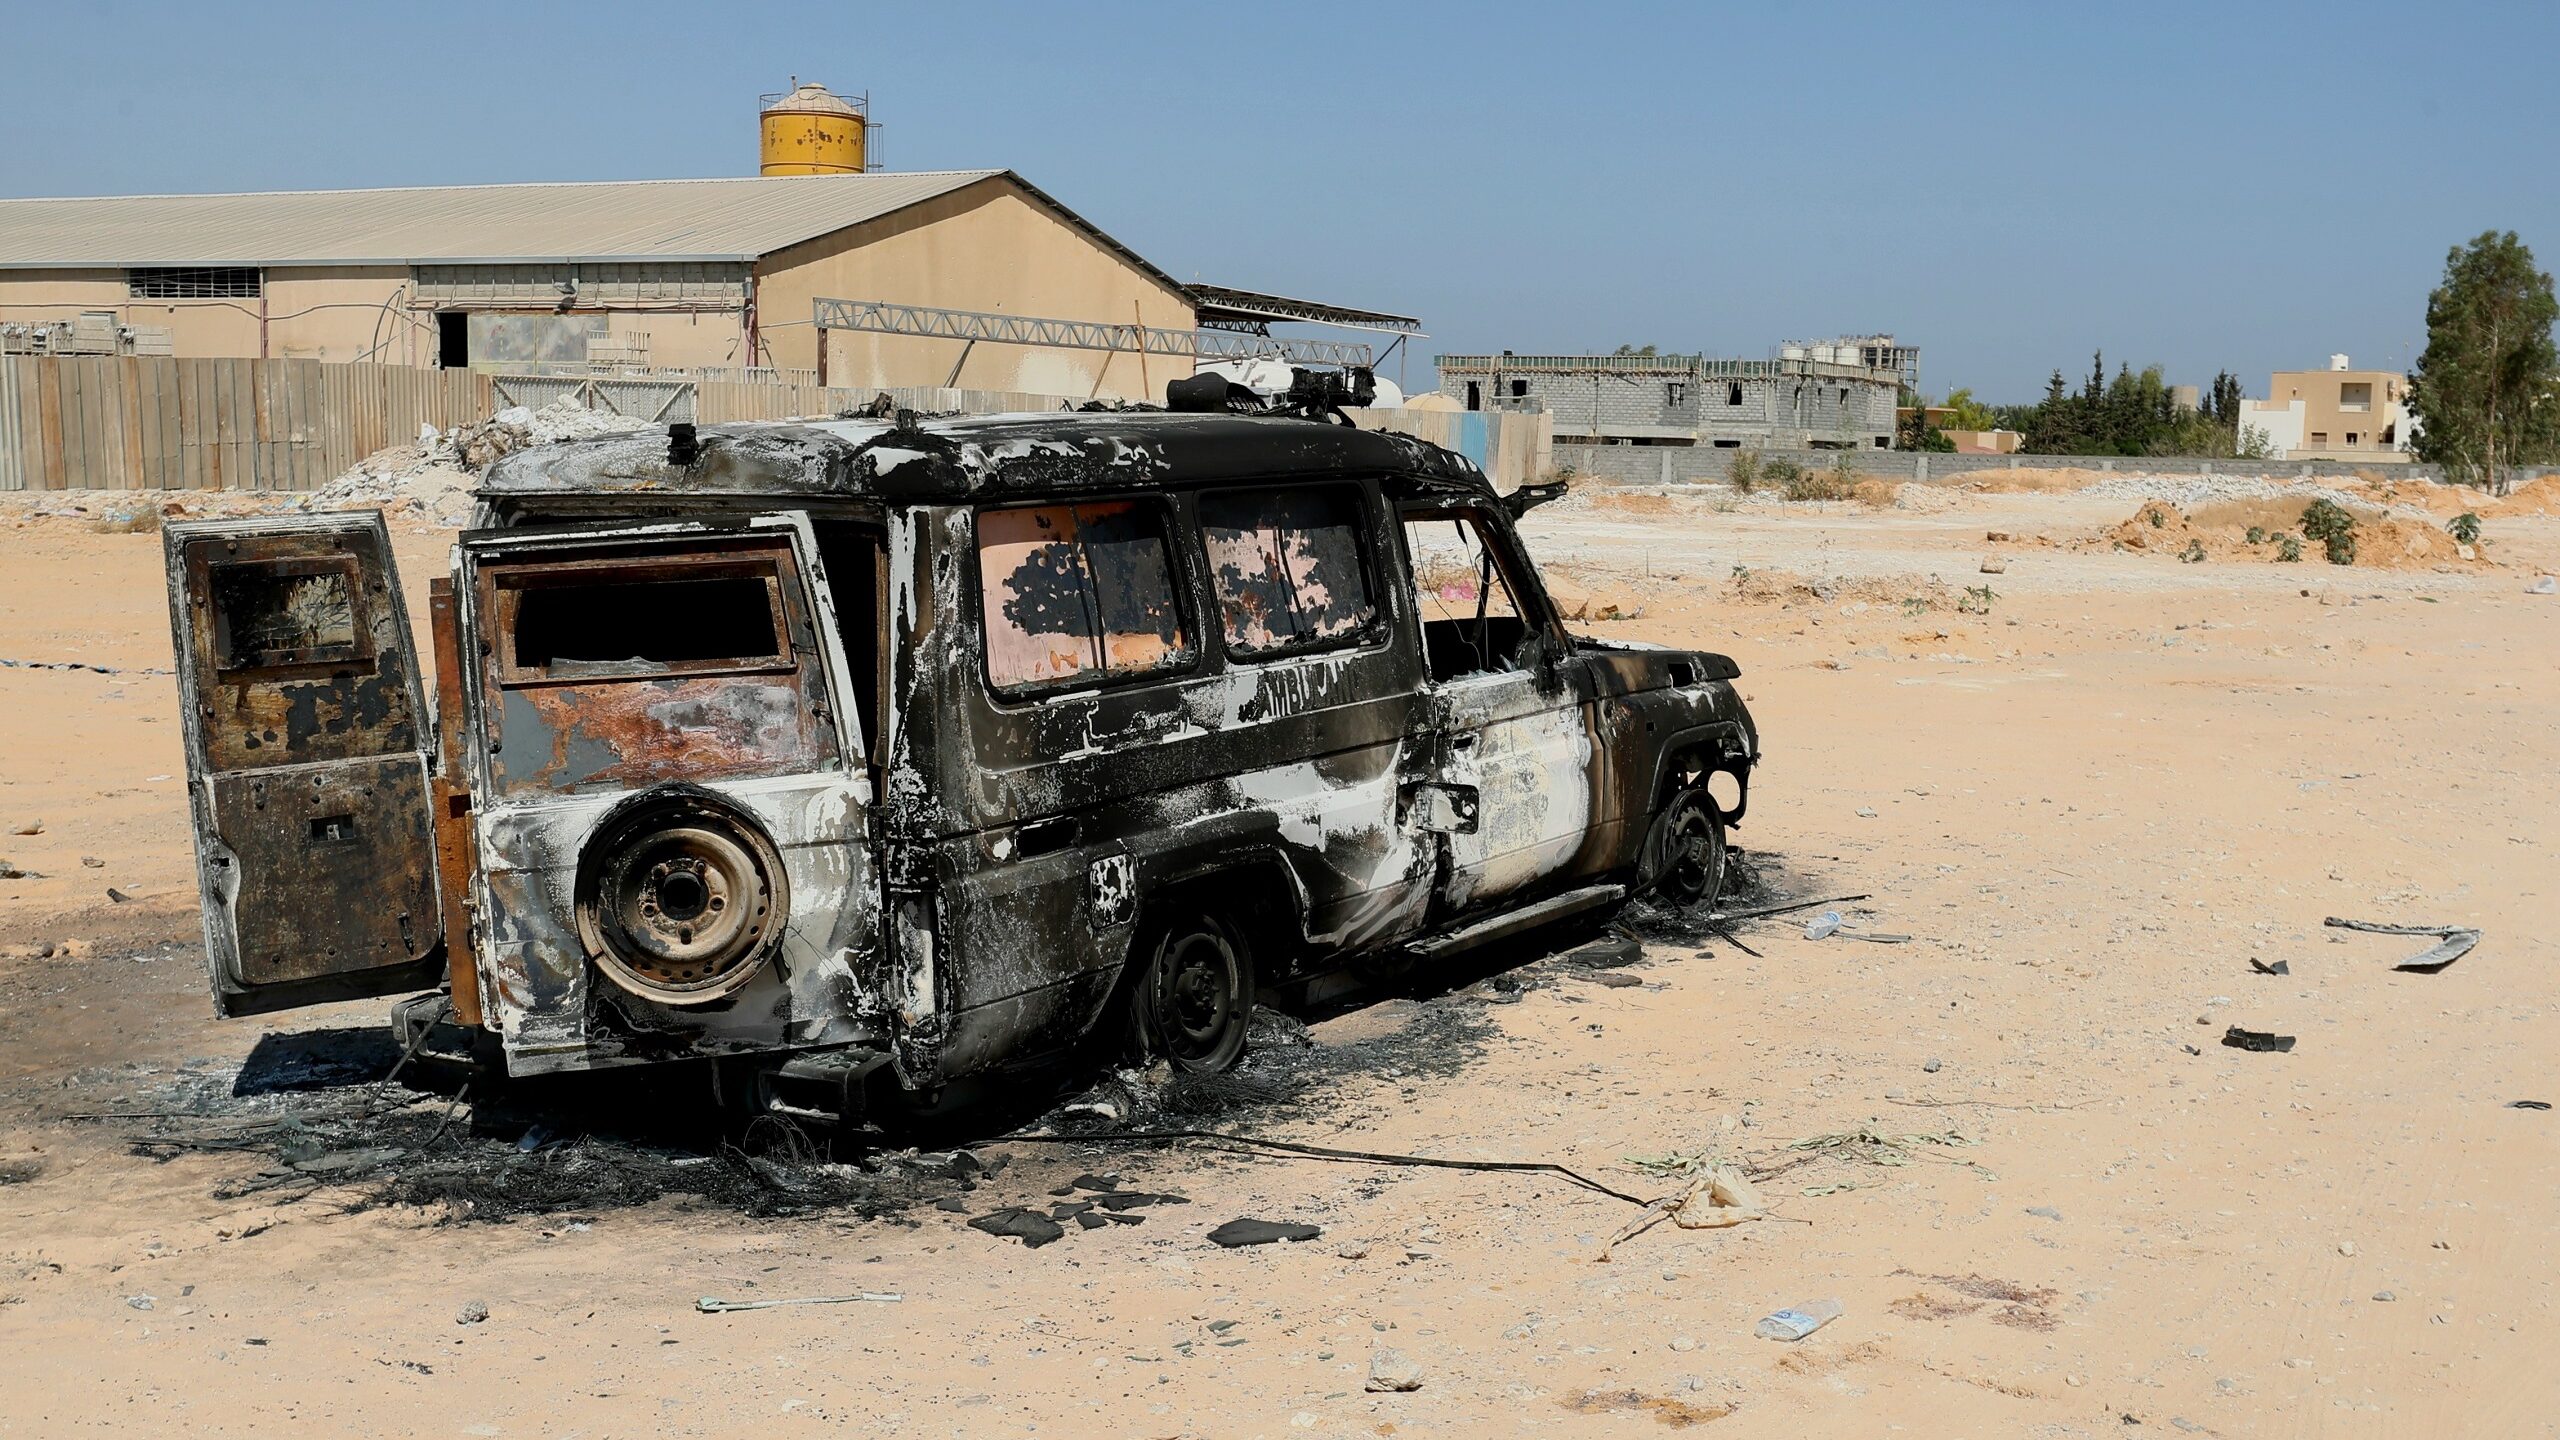 Libya’s Fragile Security: Unpacking the Recent Deadly Clashes in Tripoli